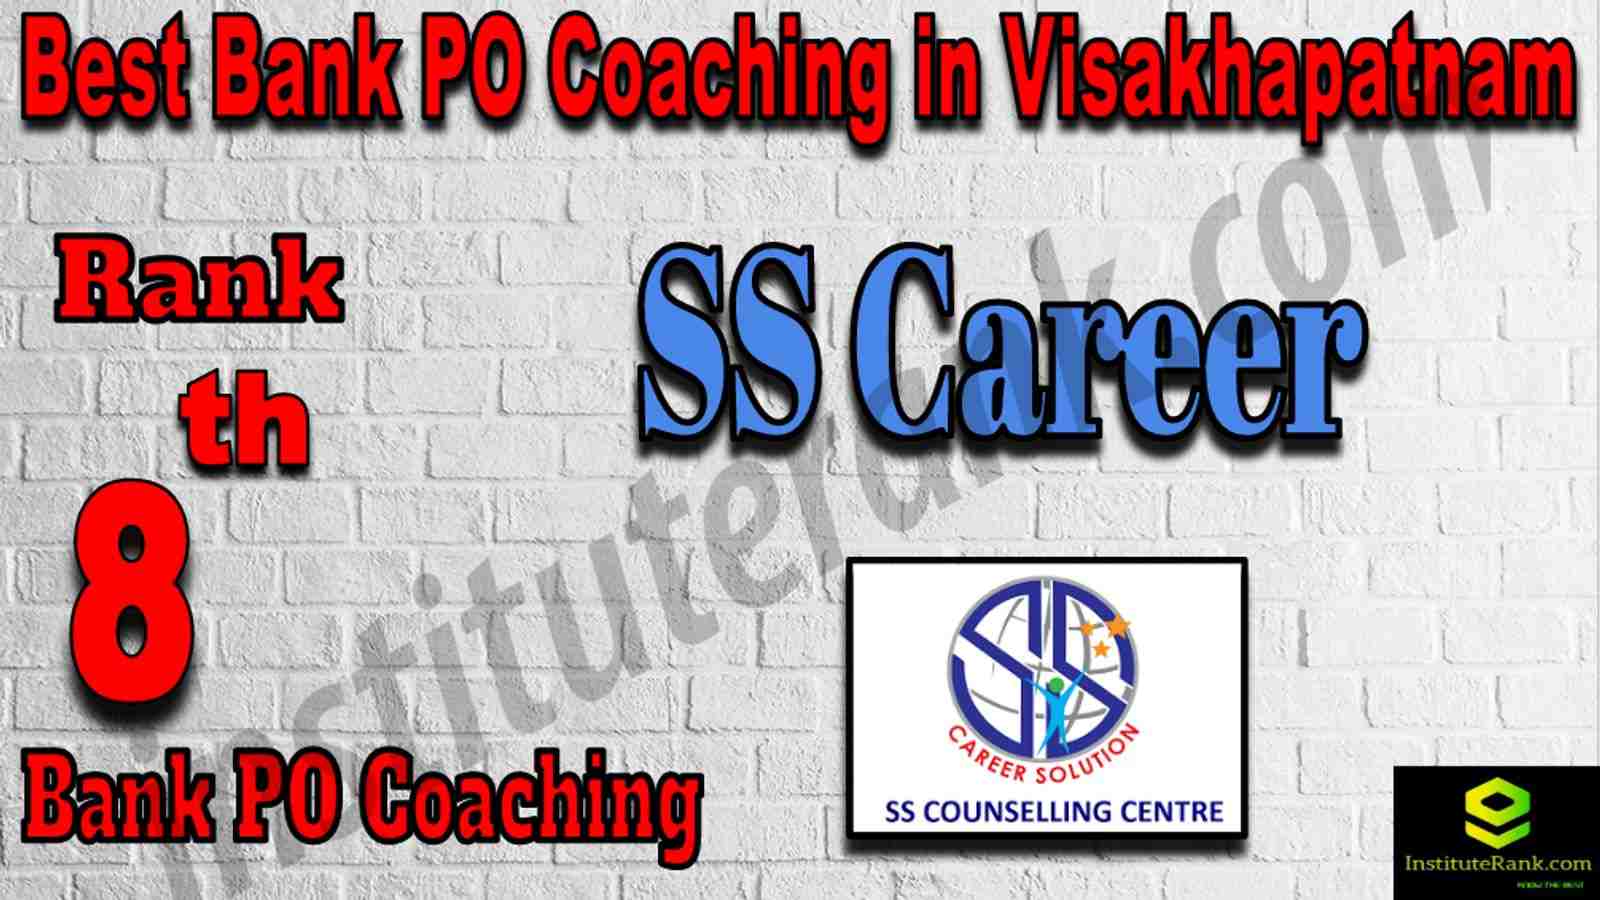 8th Best Bank PO Coaching in Visakhapatnam